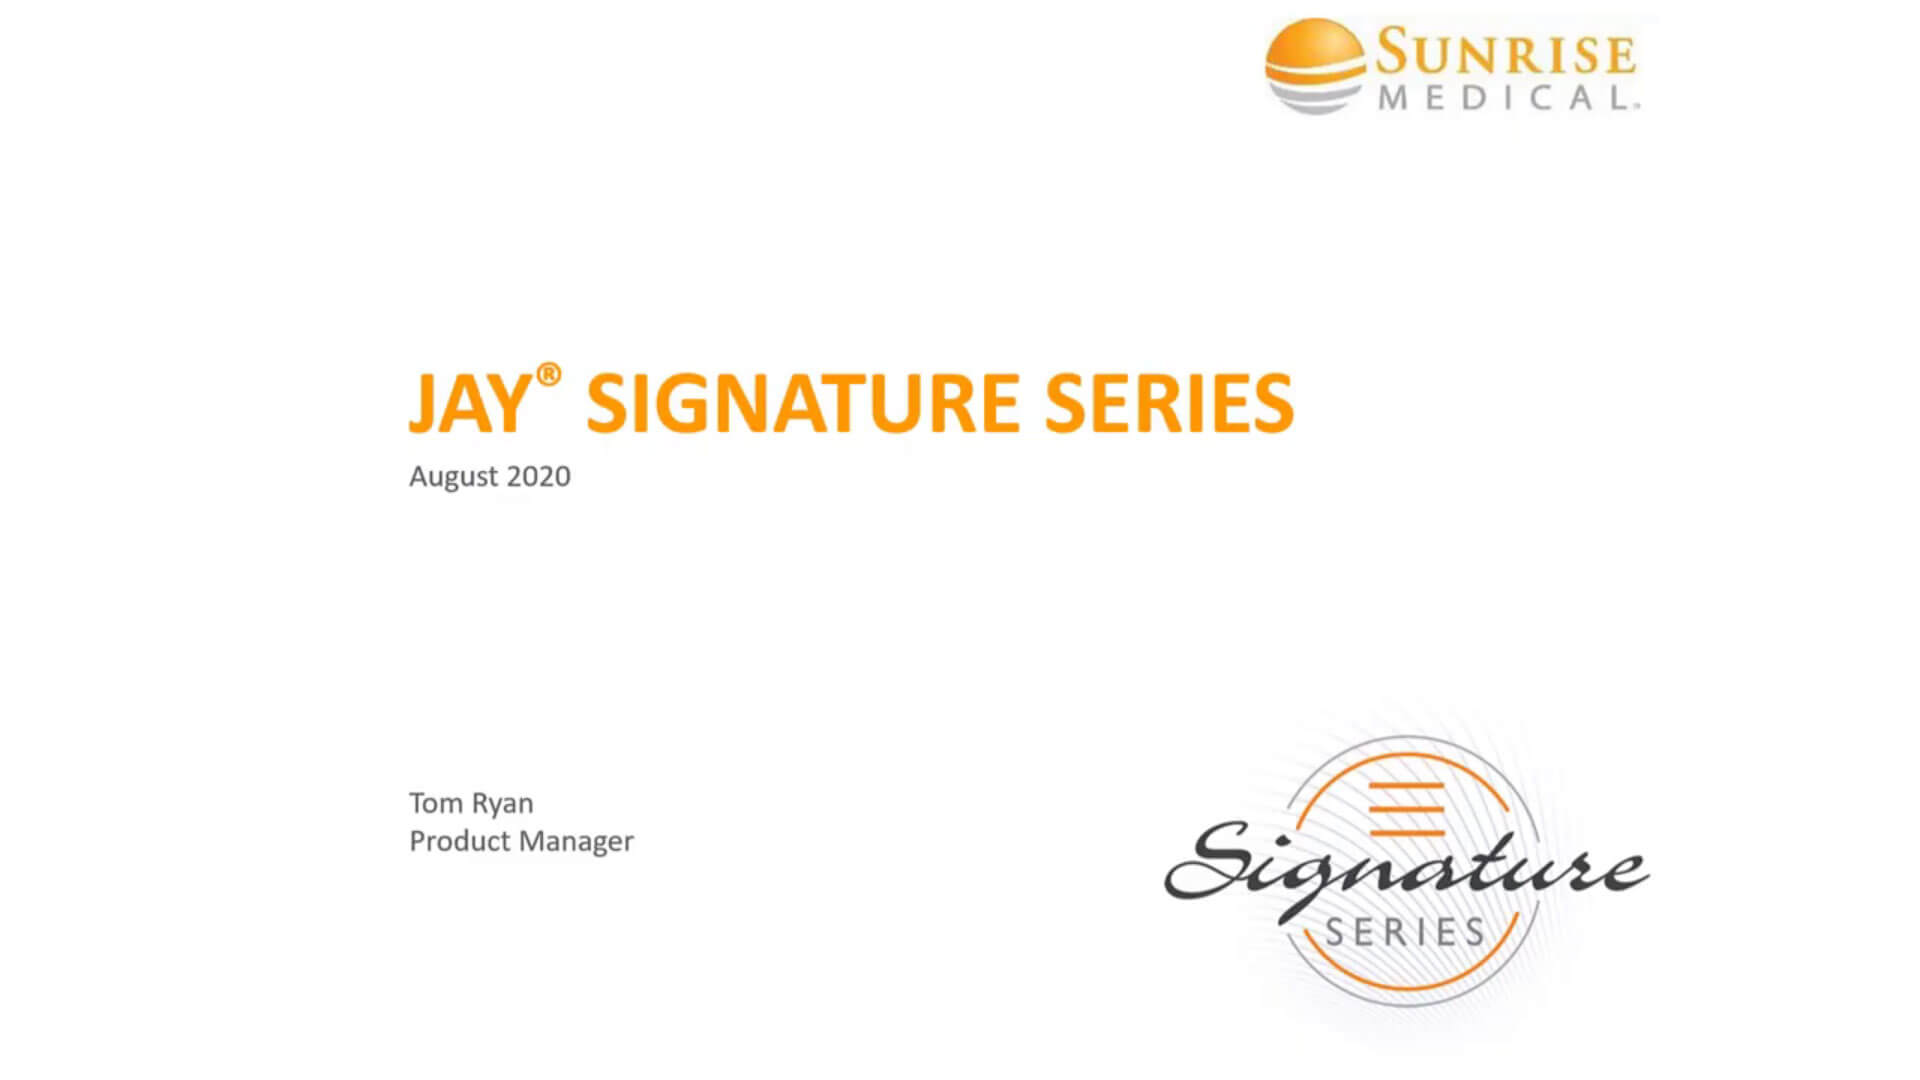 The JAY Signature Series with Tom Ryan and Angie Kiger M.Ed., CTRS, ATP/SMS